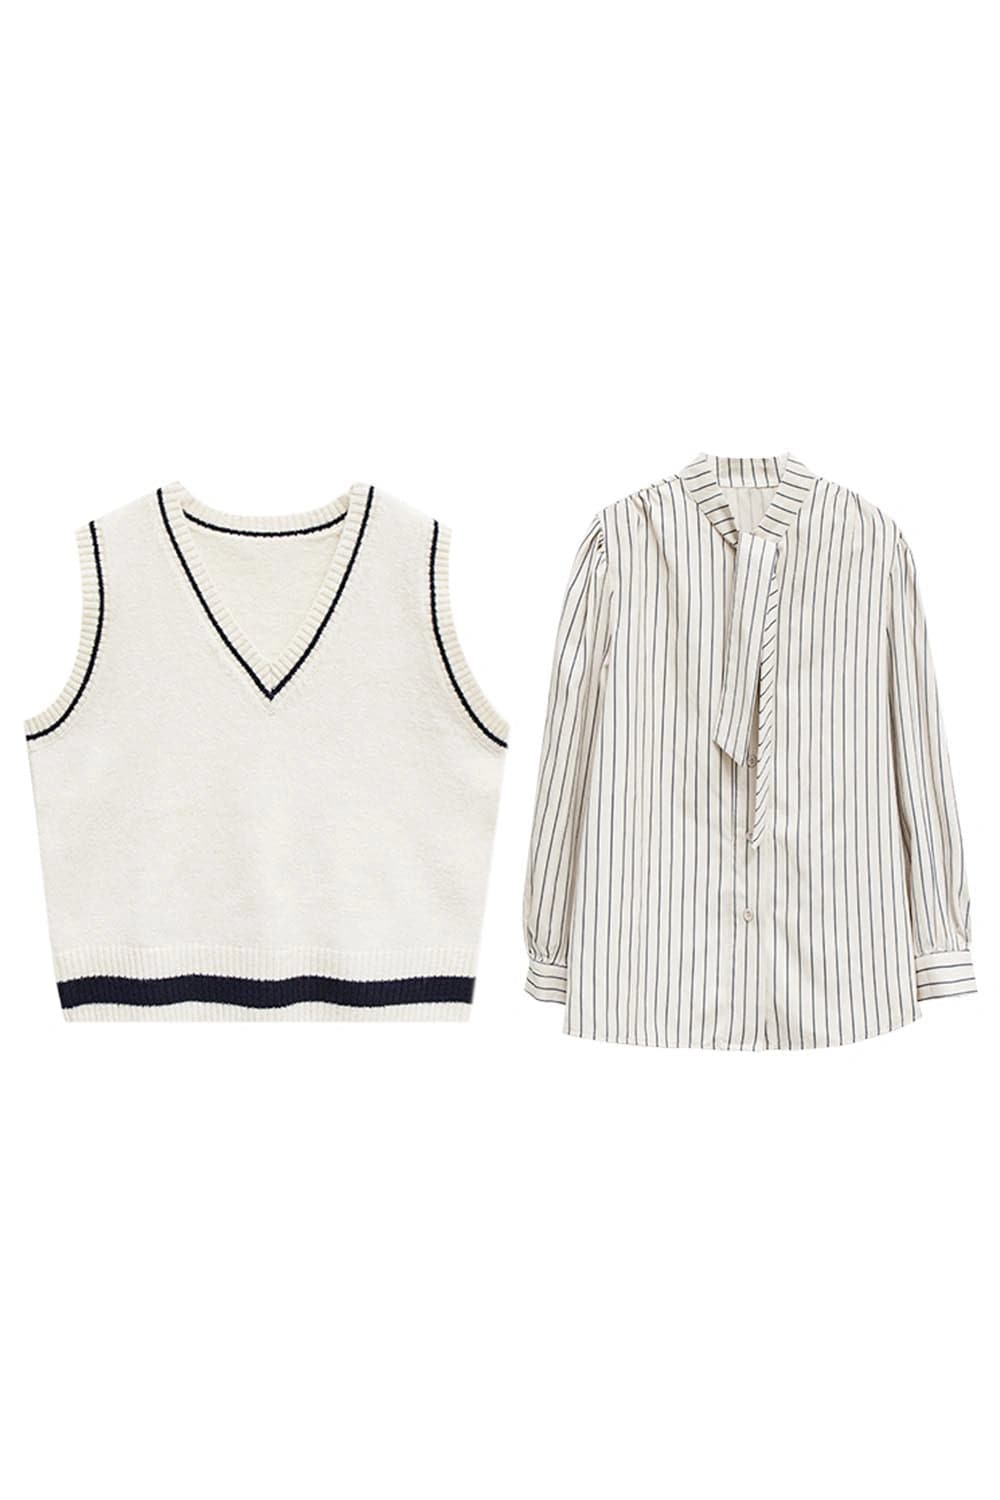 Classic Sweater Vest and Pinstripe Shirt Duo for a Smart Casual Look